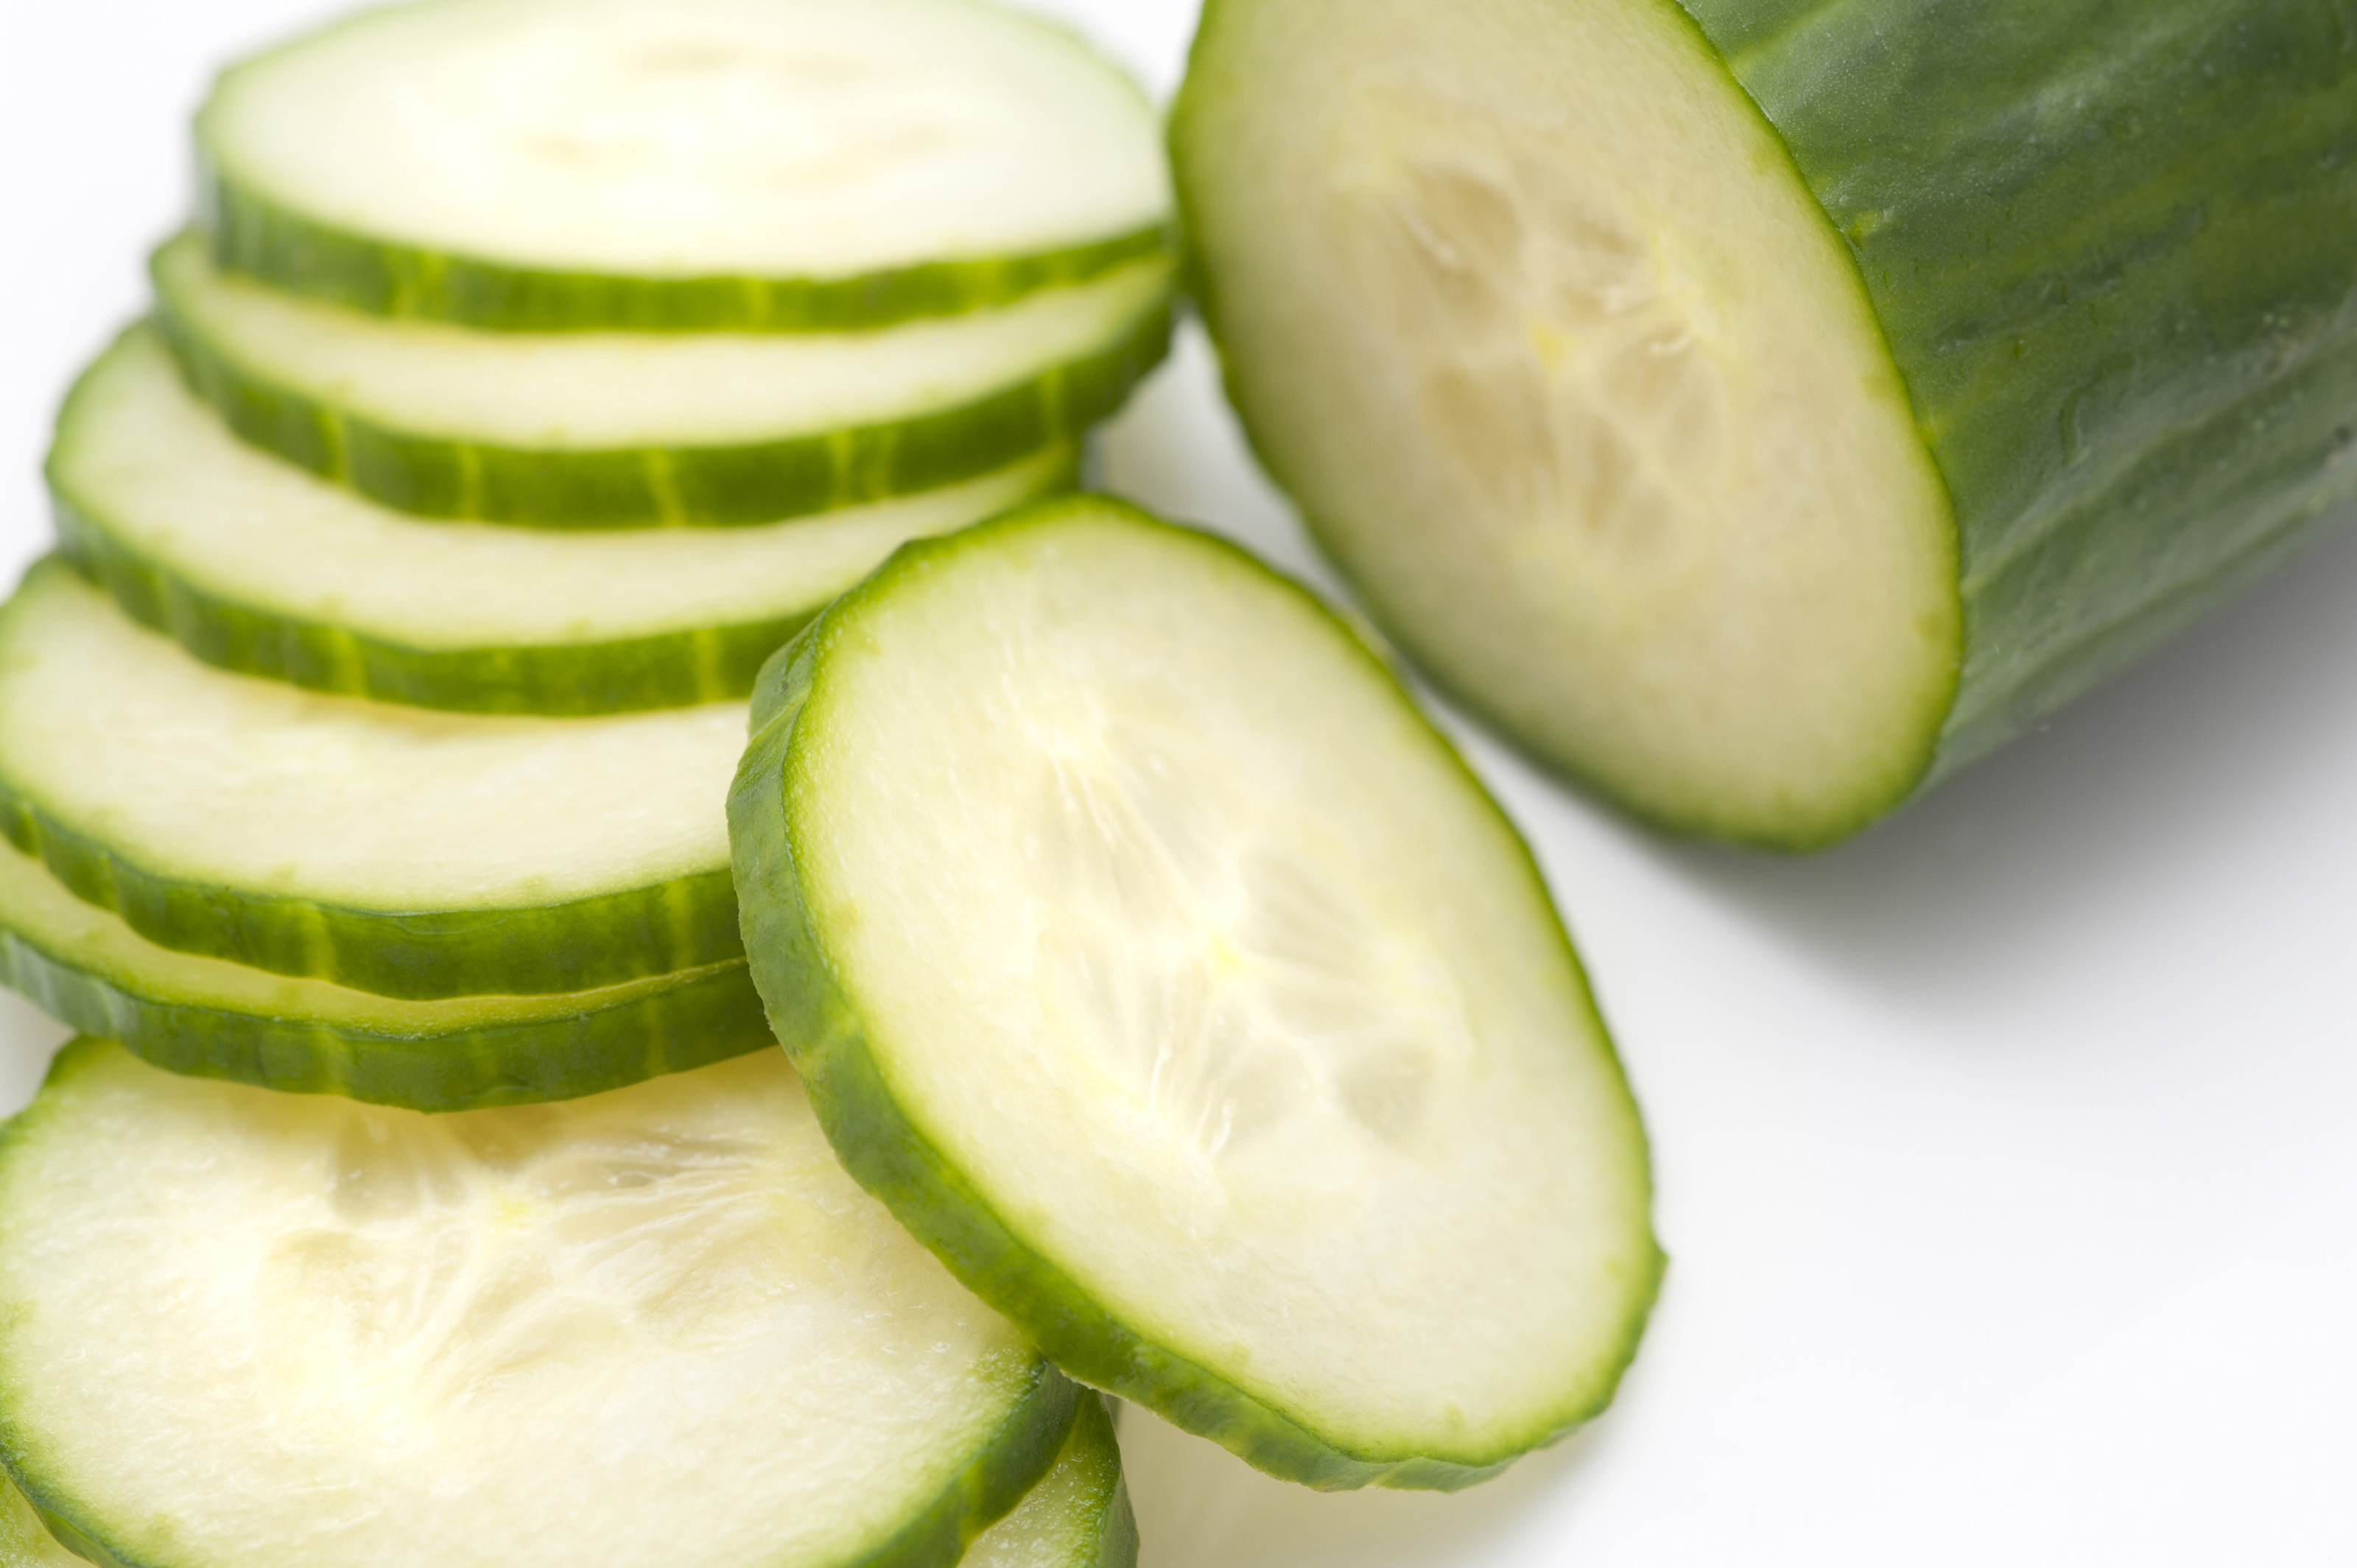 Sliced Cucumber 7803 Stockarch Free Stock Photo Archive